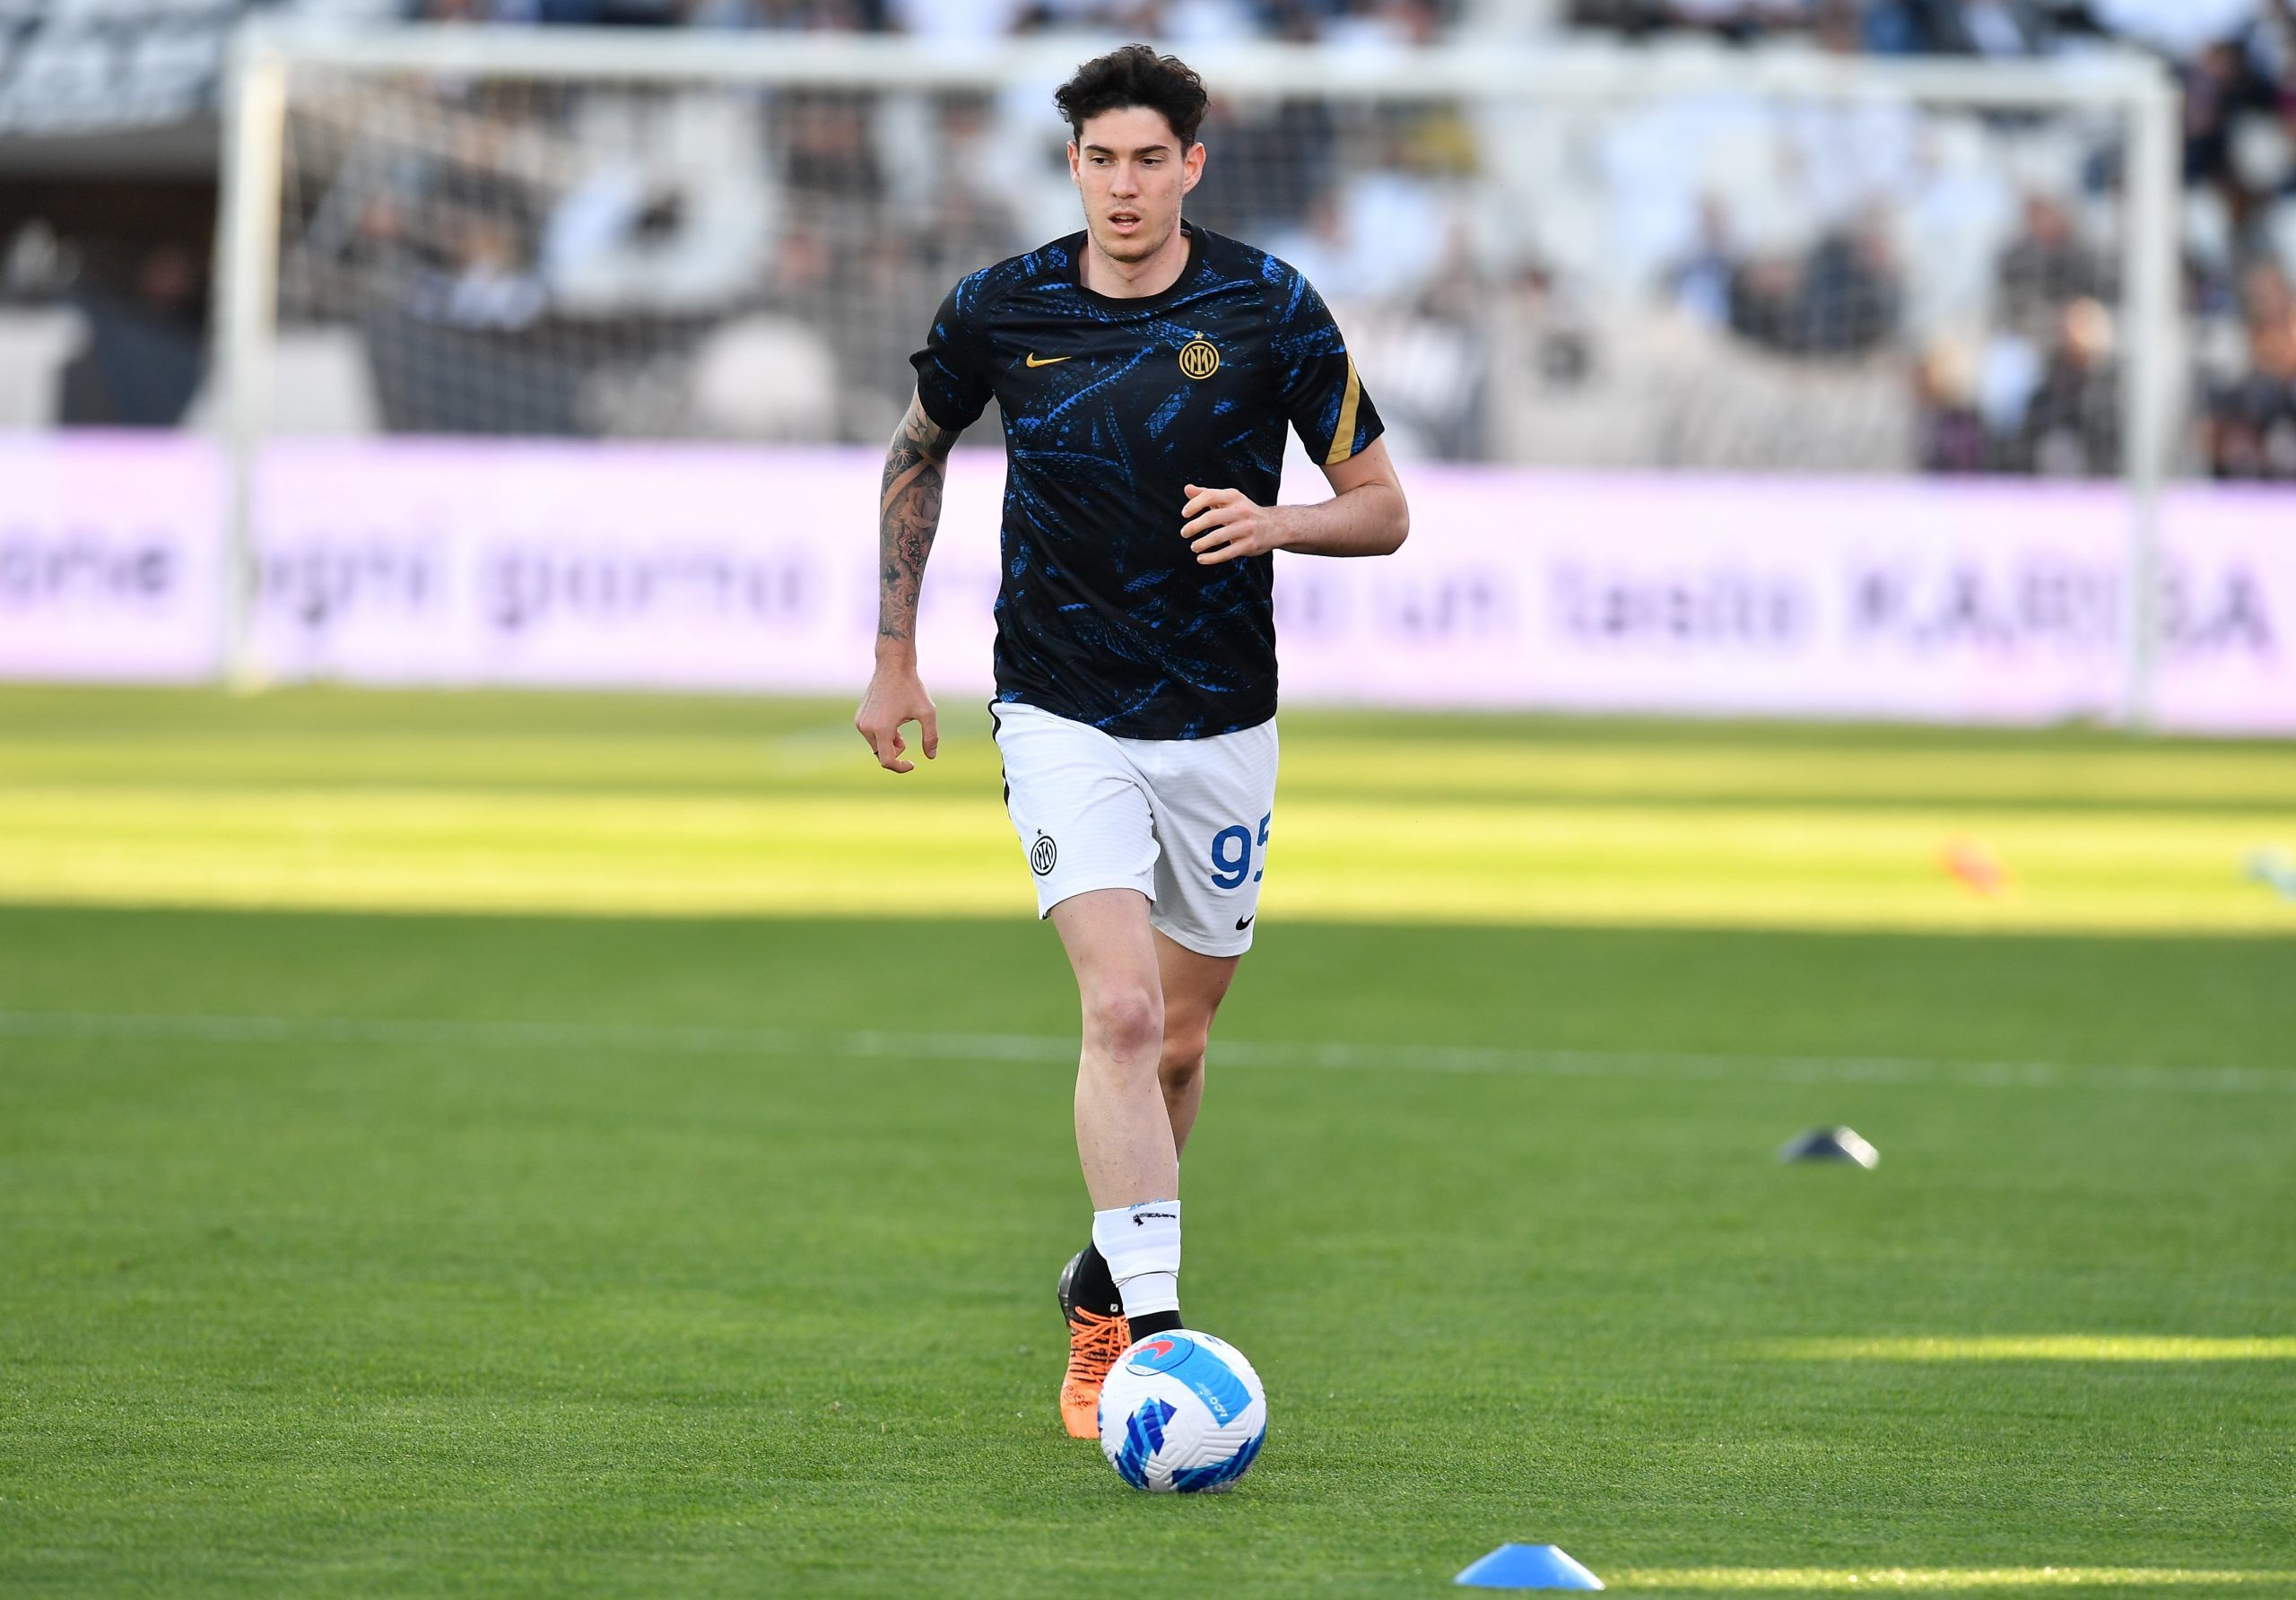  Inter Milan's Alessandro Bastoni during the warm up before the match